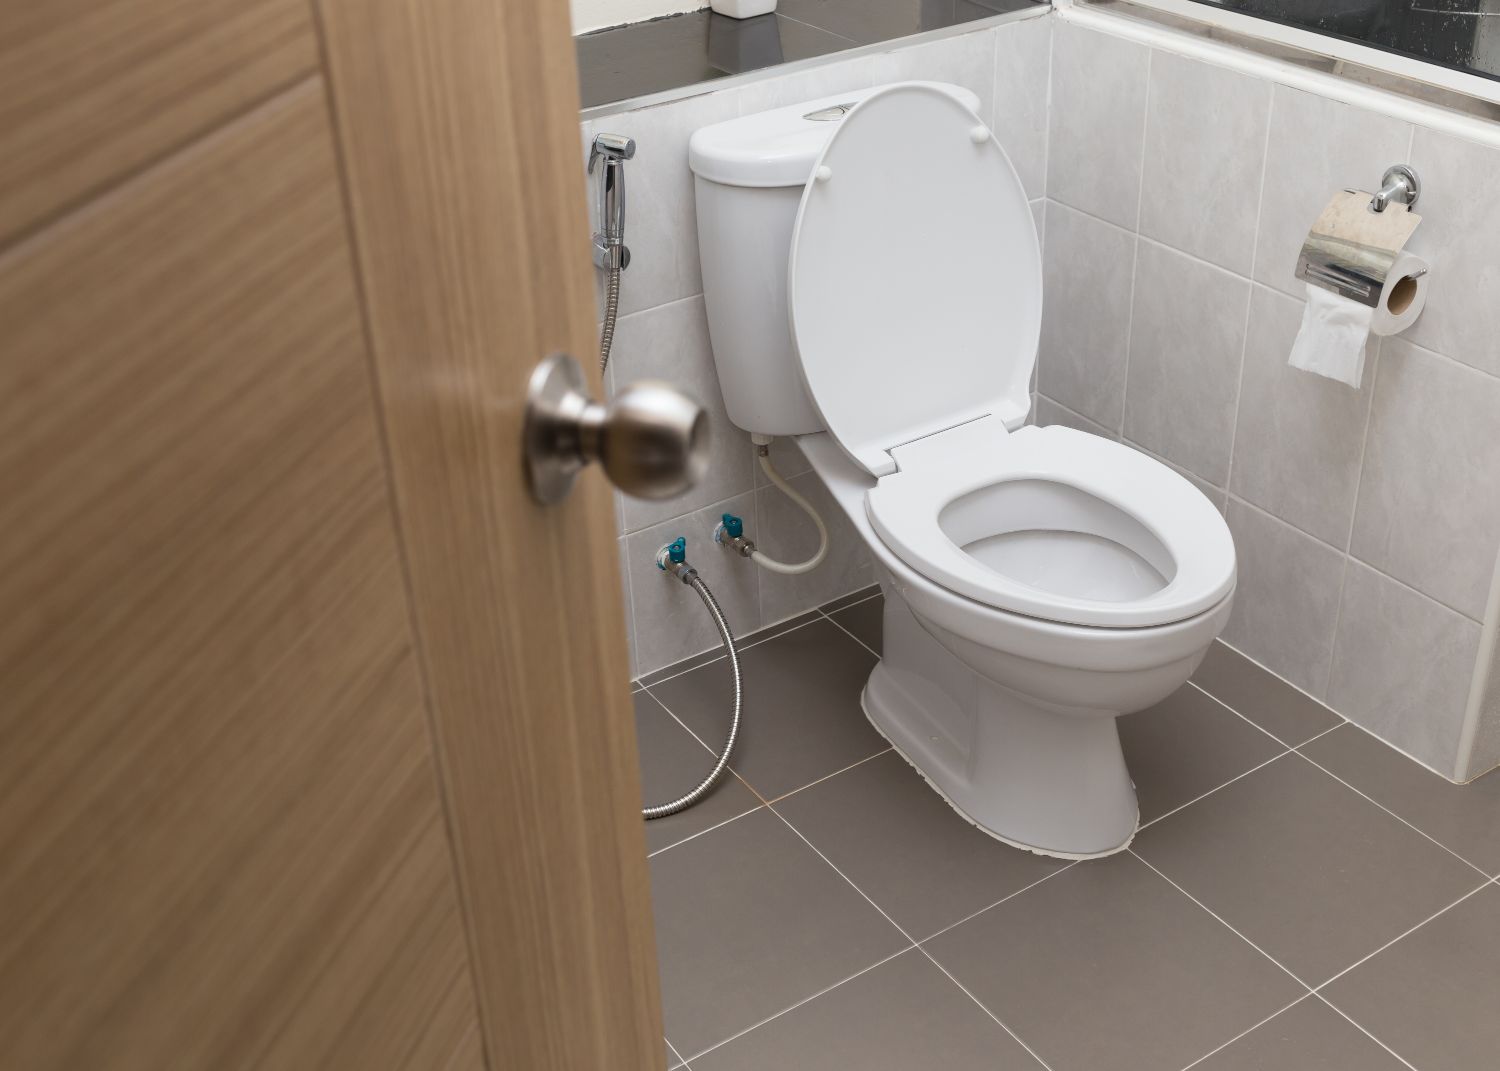 An image of a toilet